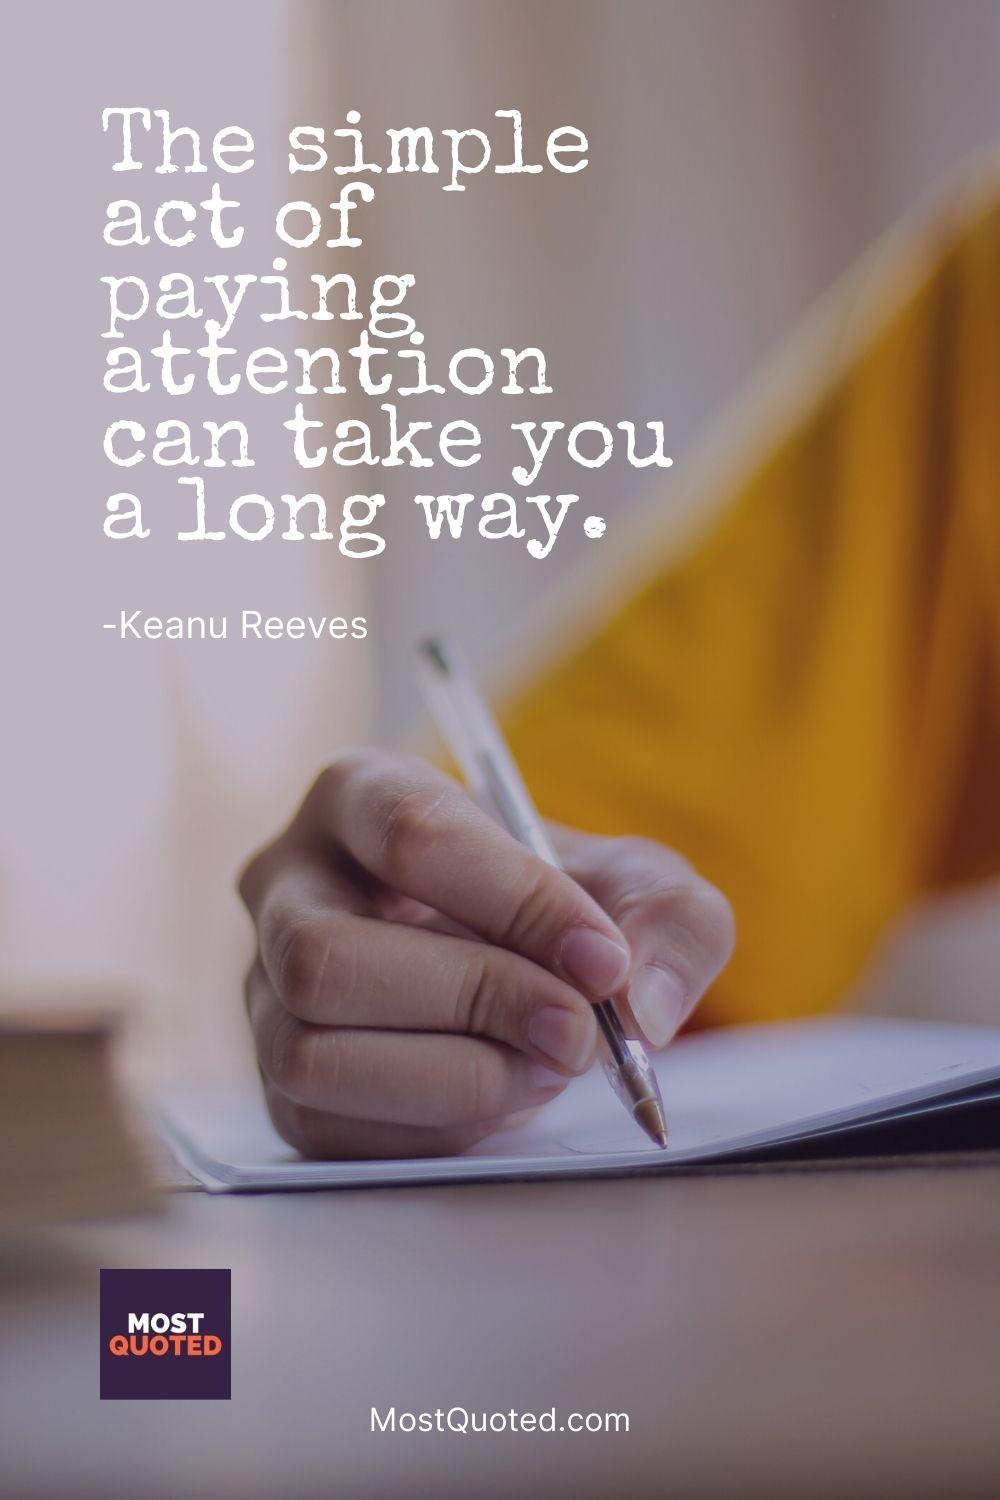 The simple act of paying attention can take you a long way. - Keanu Reeves